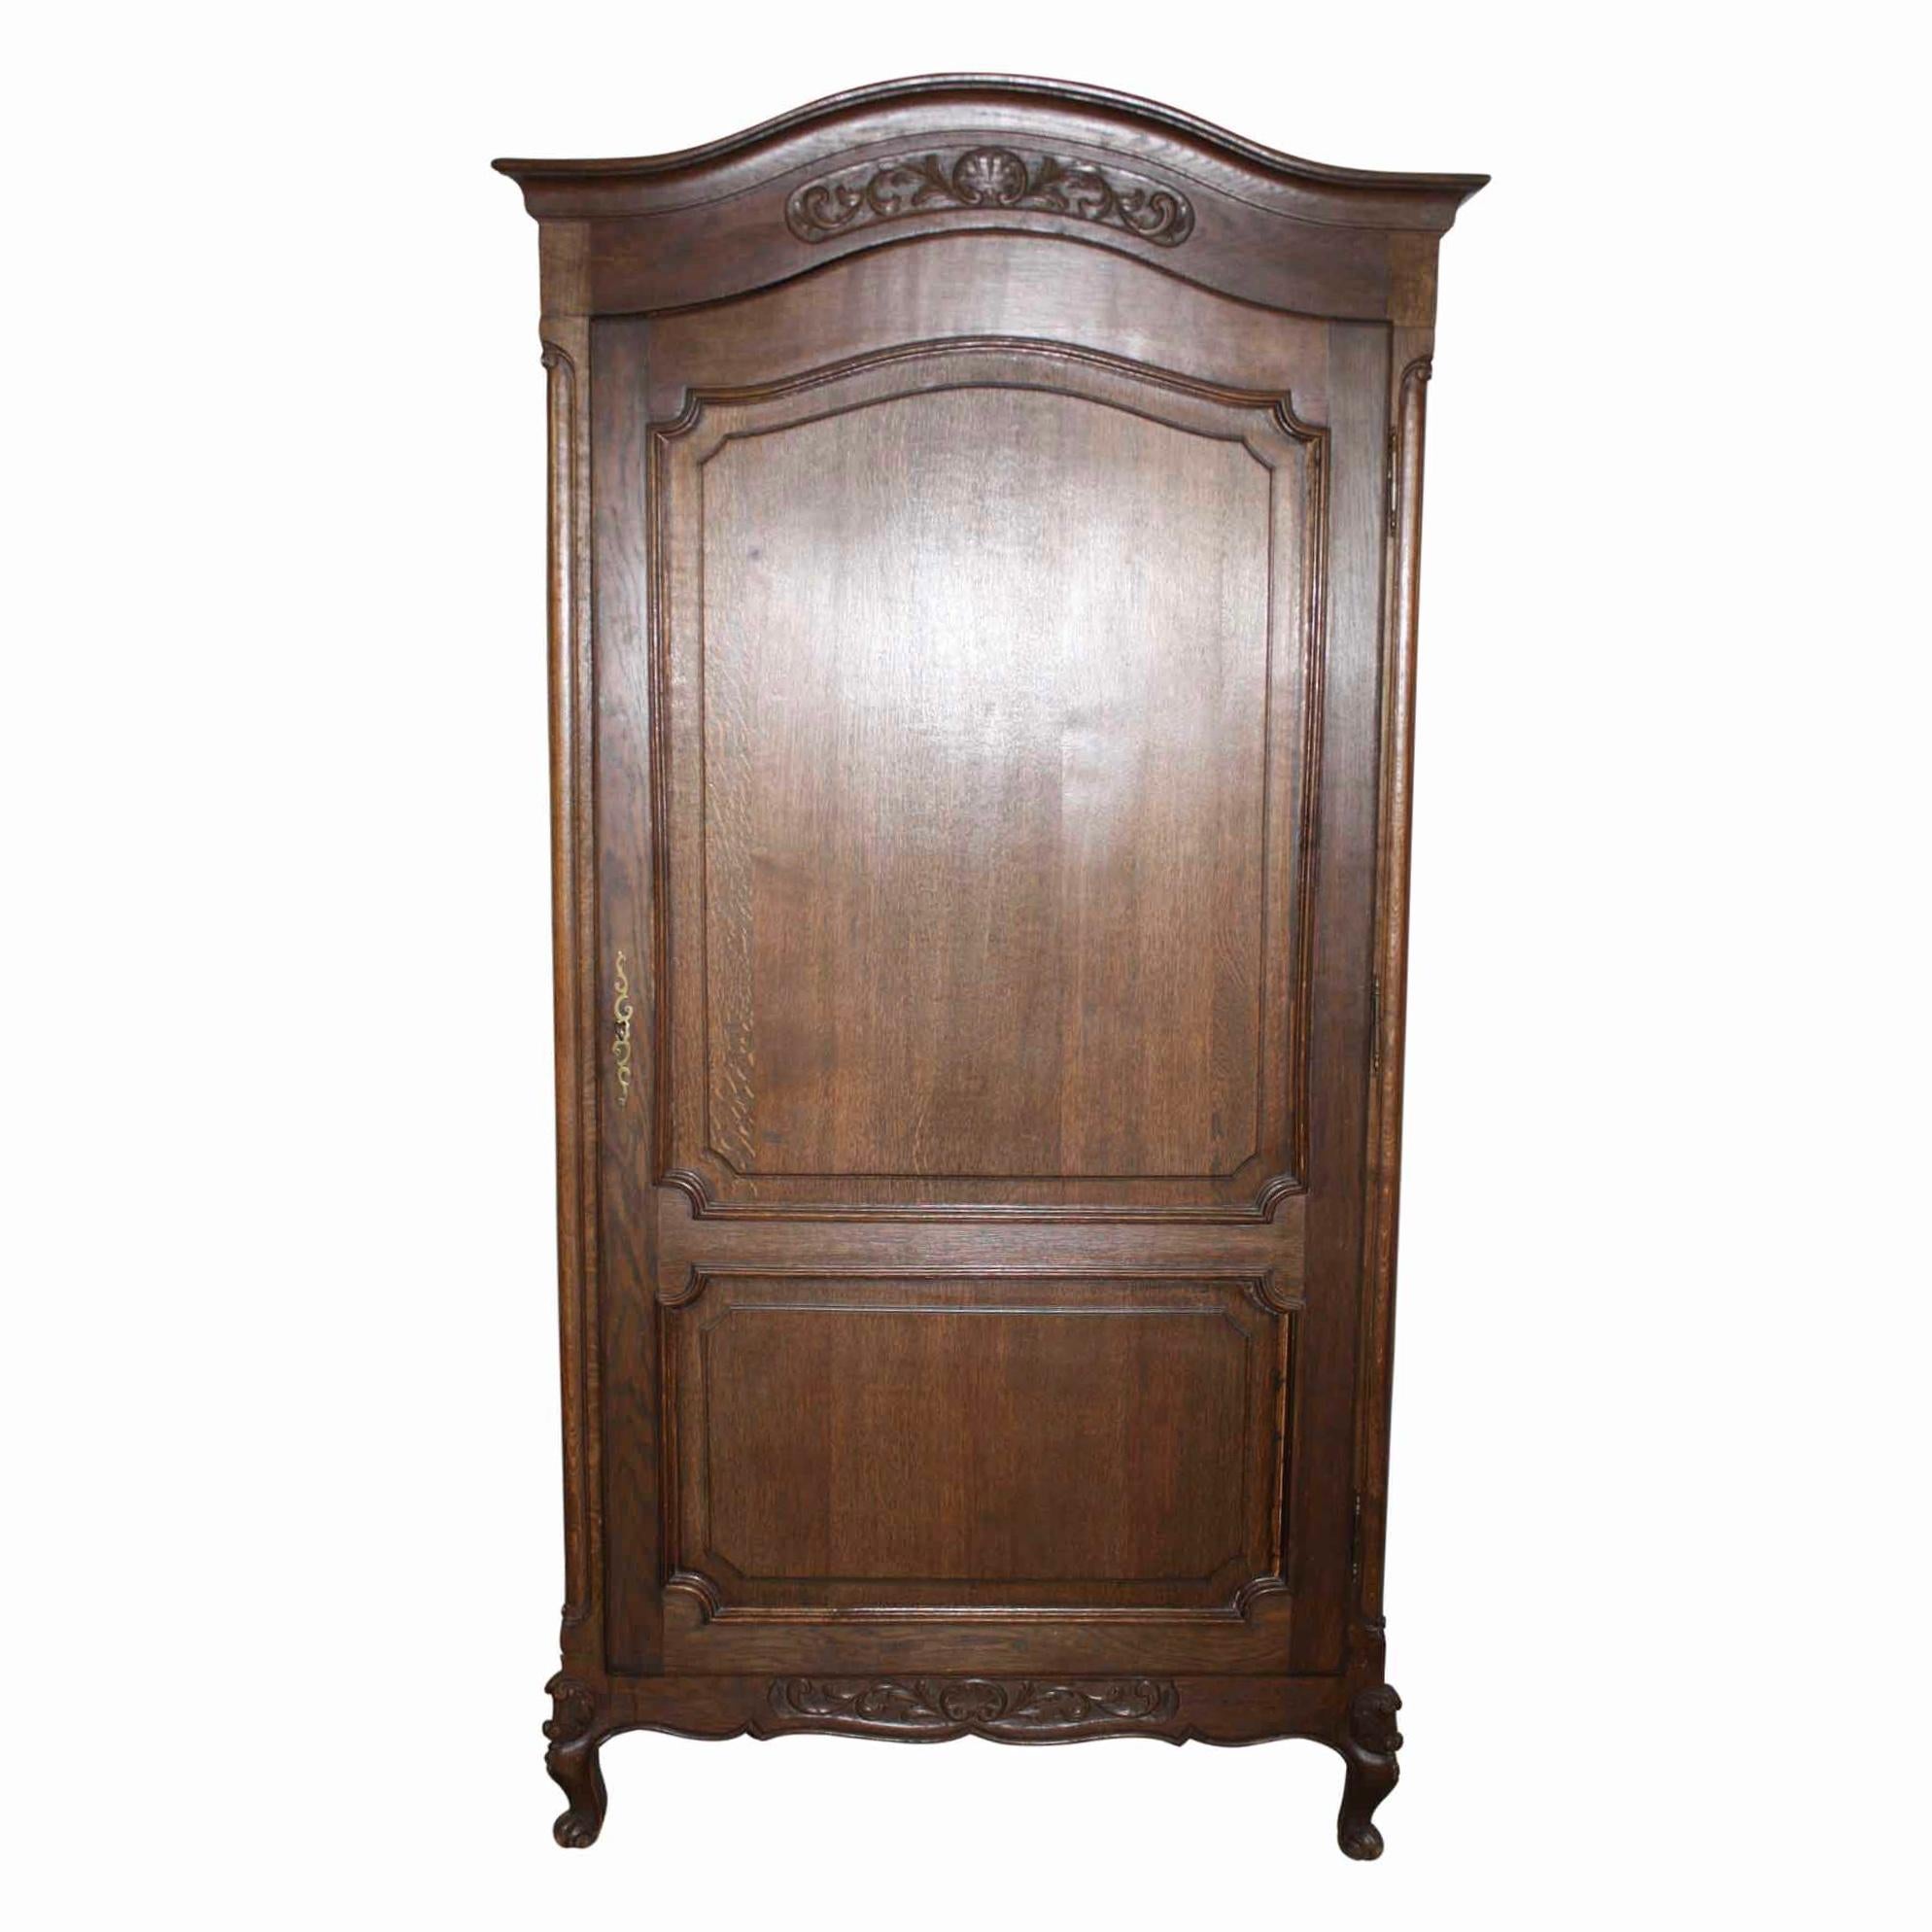 Matched carvings of a shell flanked by scrolling, acanthus leaves adorn the arched bonnet and scalloped apron of this single door armoire. The door opens to three adjustable shelves. The sides are comprised of four raised panels. Cabriole front legs